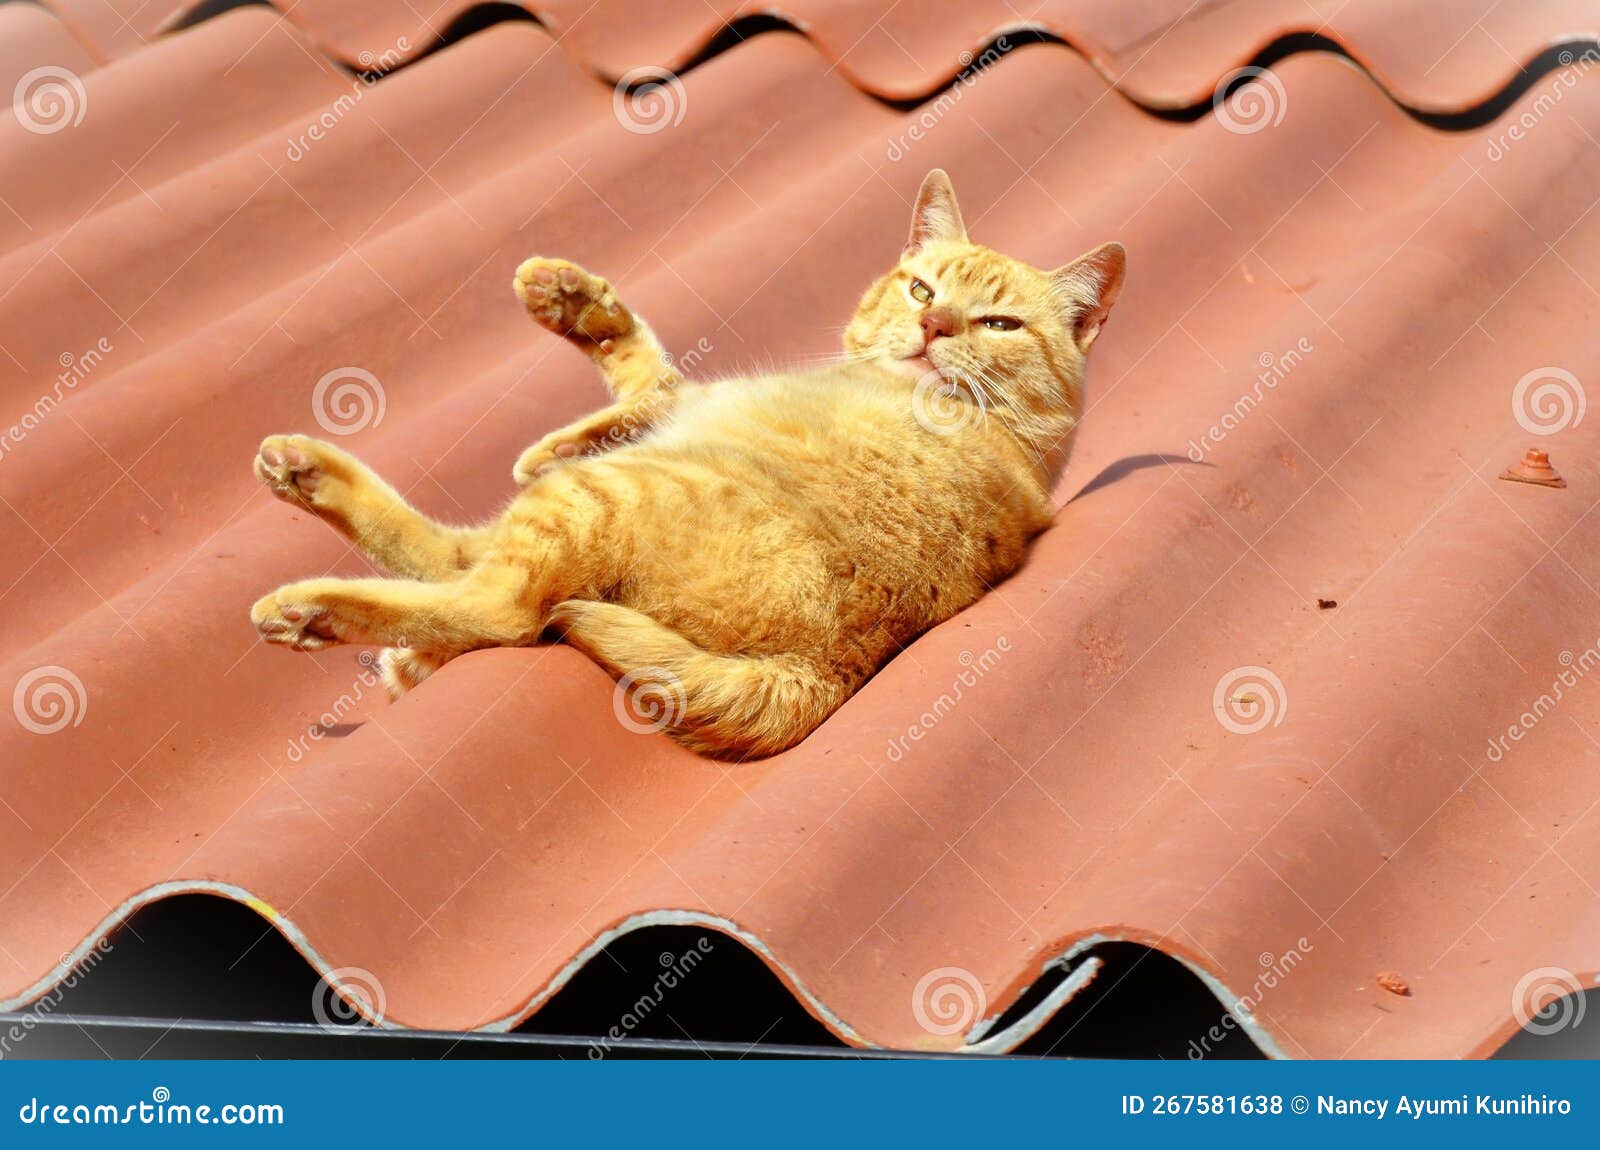 orange felis catus lying peacefully on the roof in sunny day